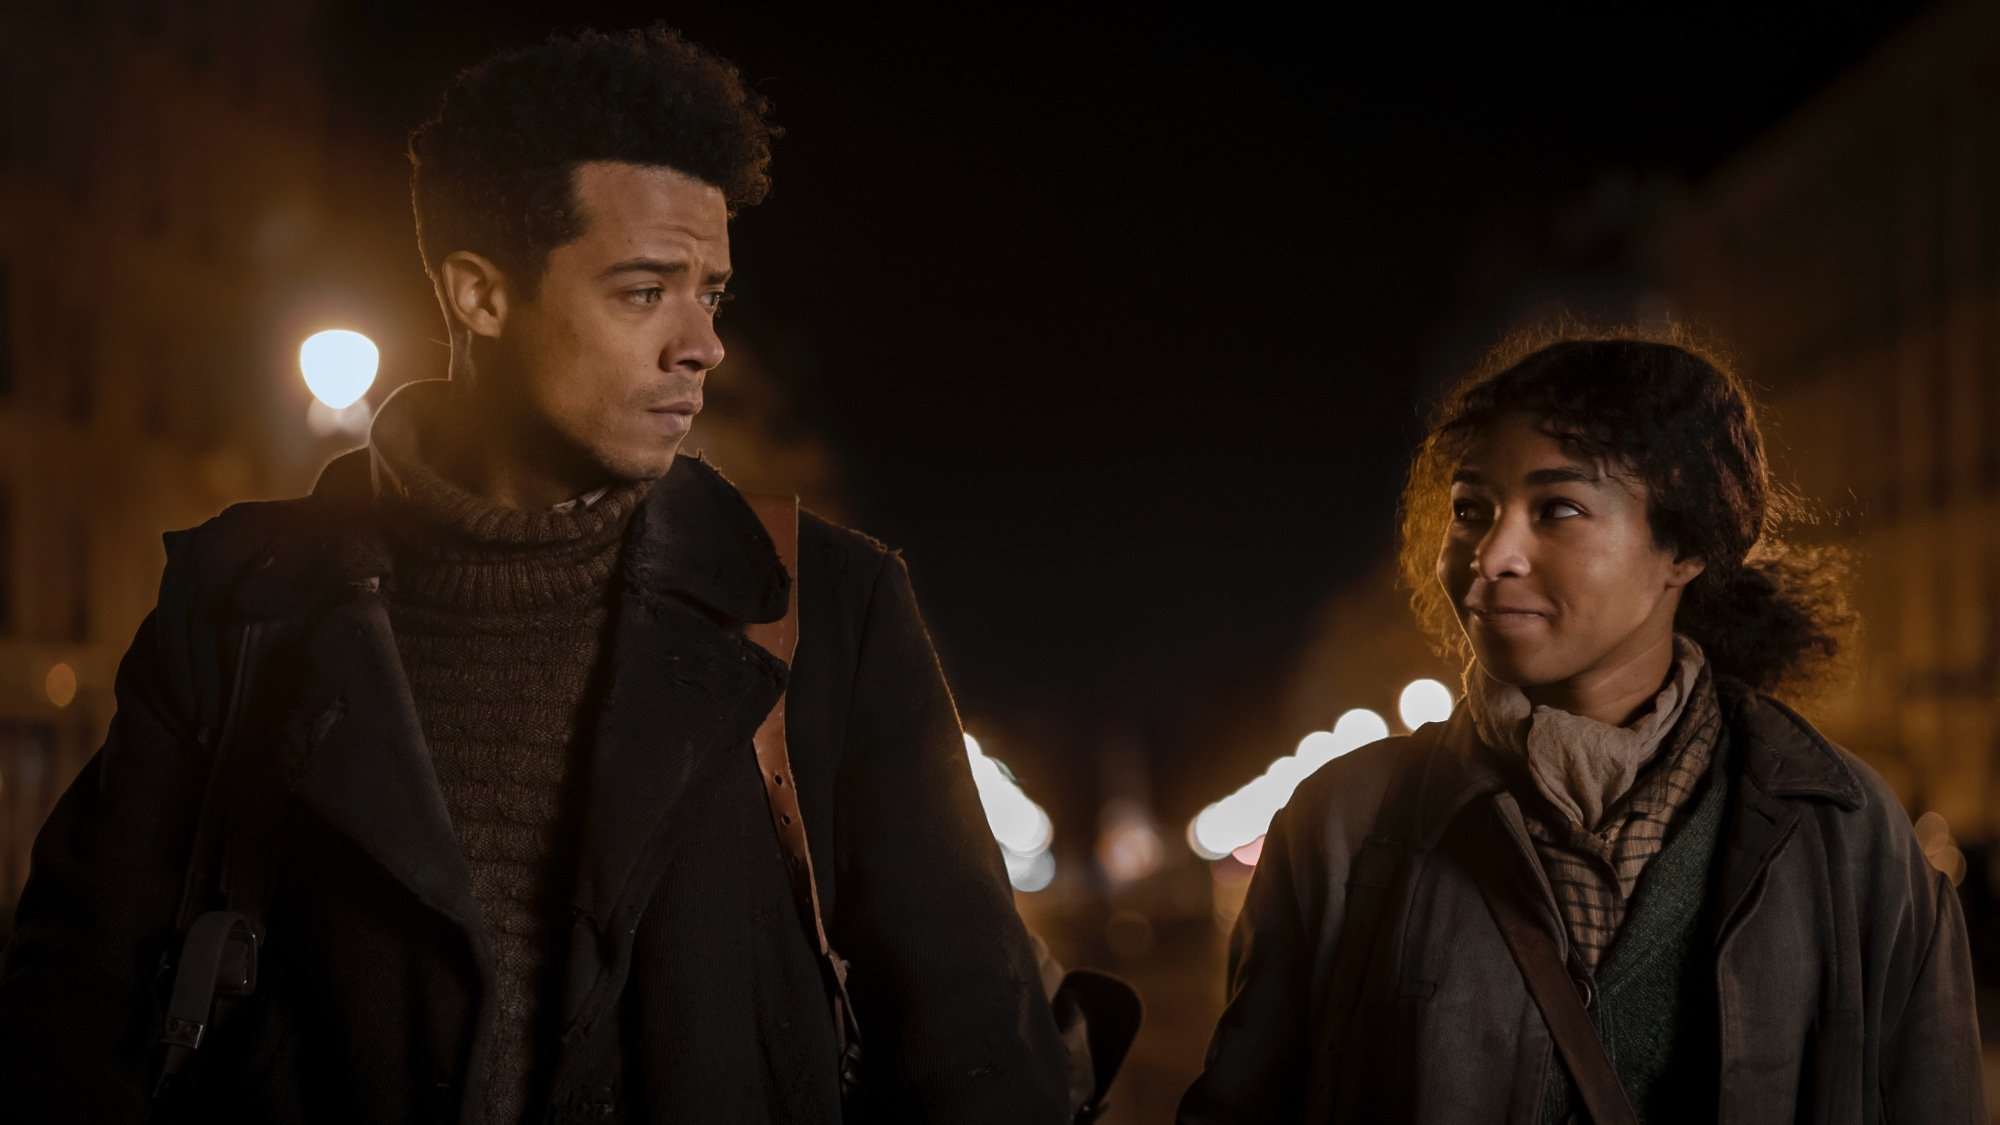 Delainey Hayles and Jacob Anderson reach Paris as Claudia and Louis in "Interview with the Vampire: Part II."